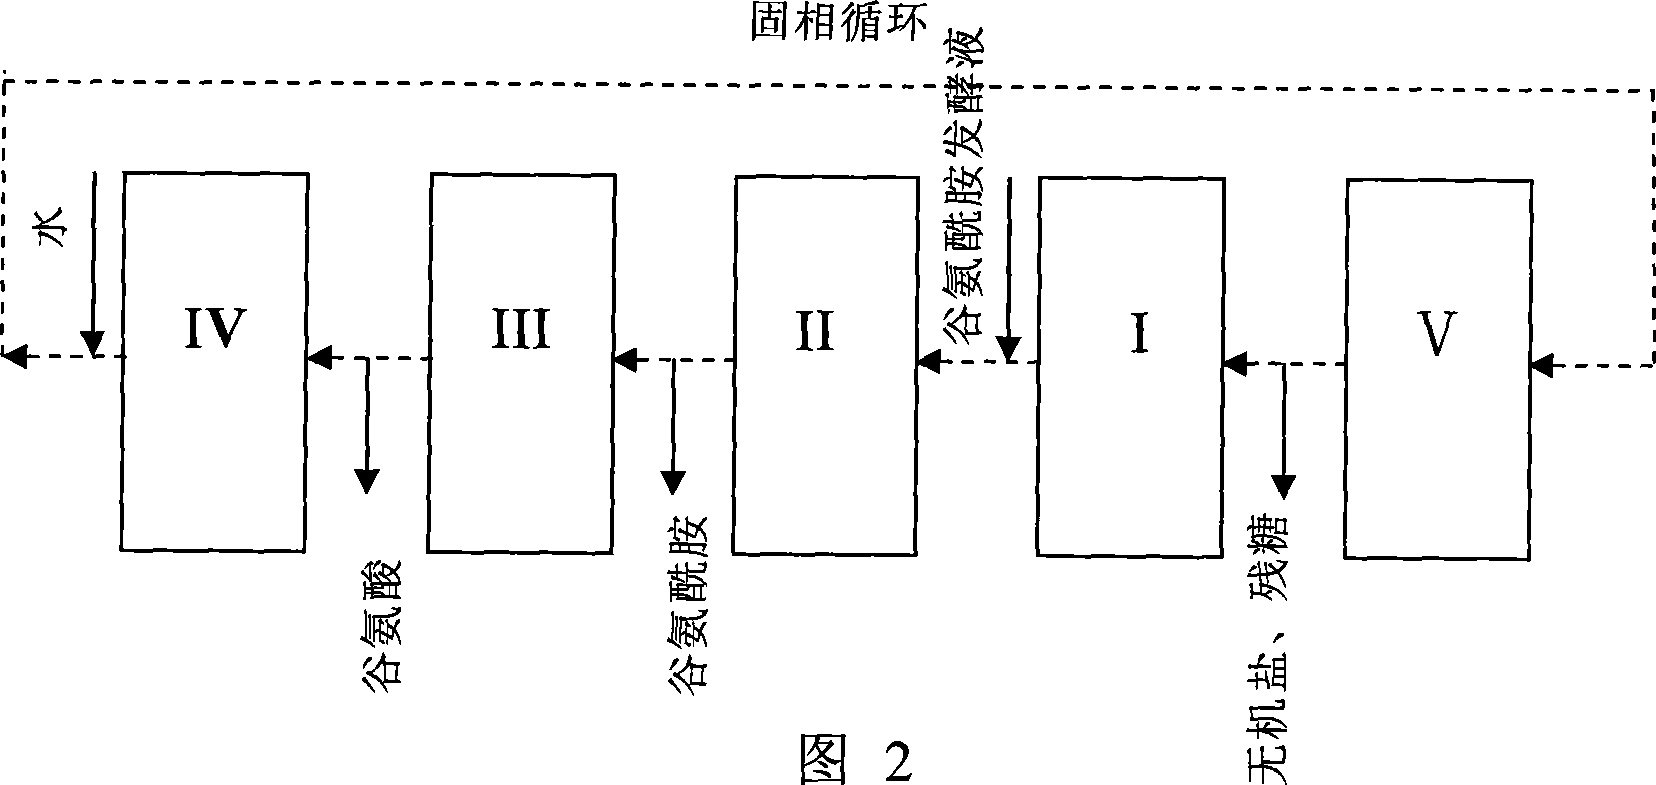 Method for separating and purifying glutamine and aminoglutaric acid from glutamine fermentation liquor